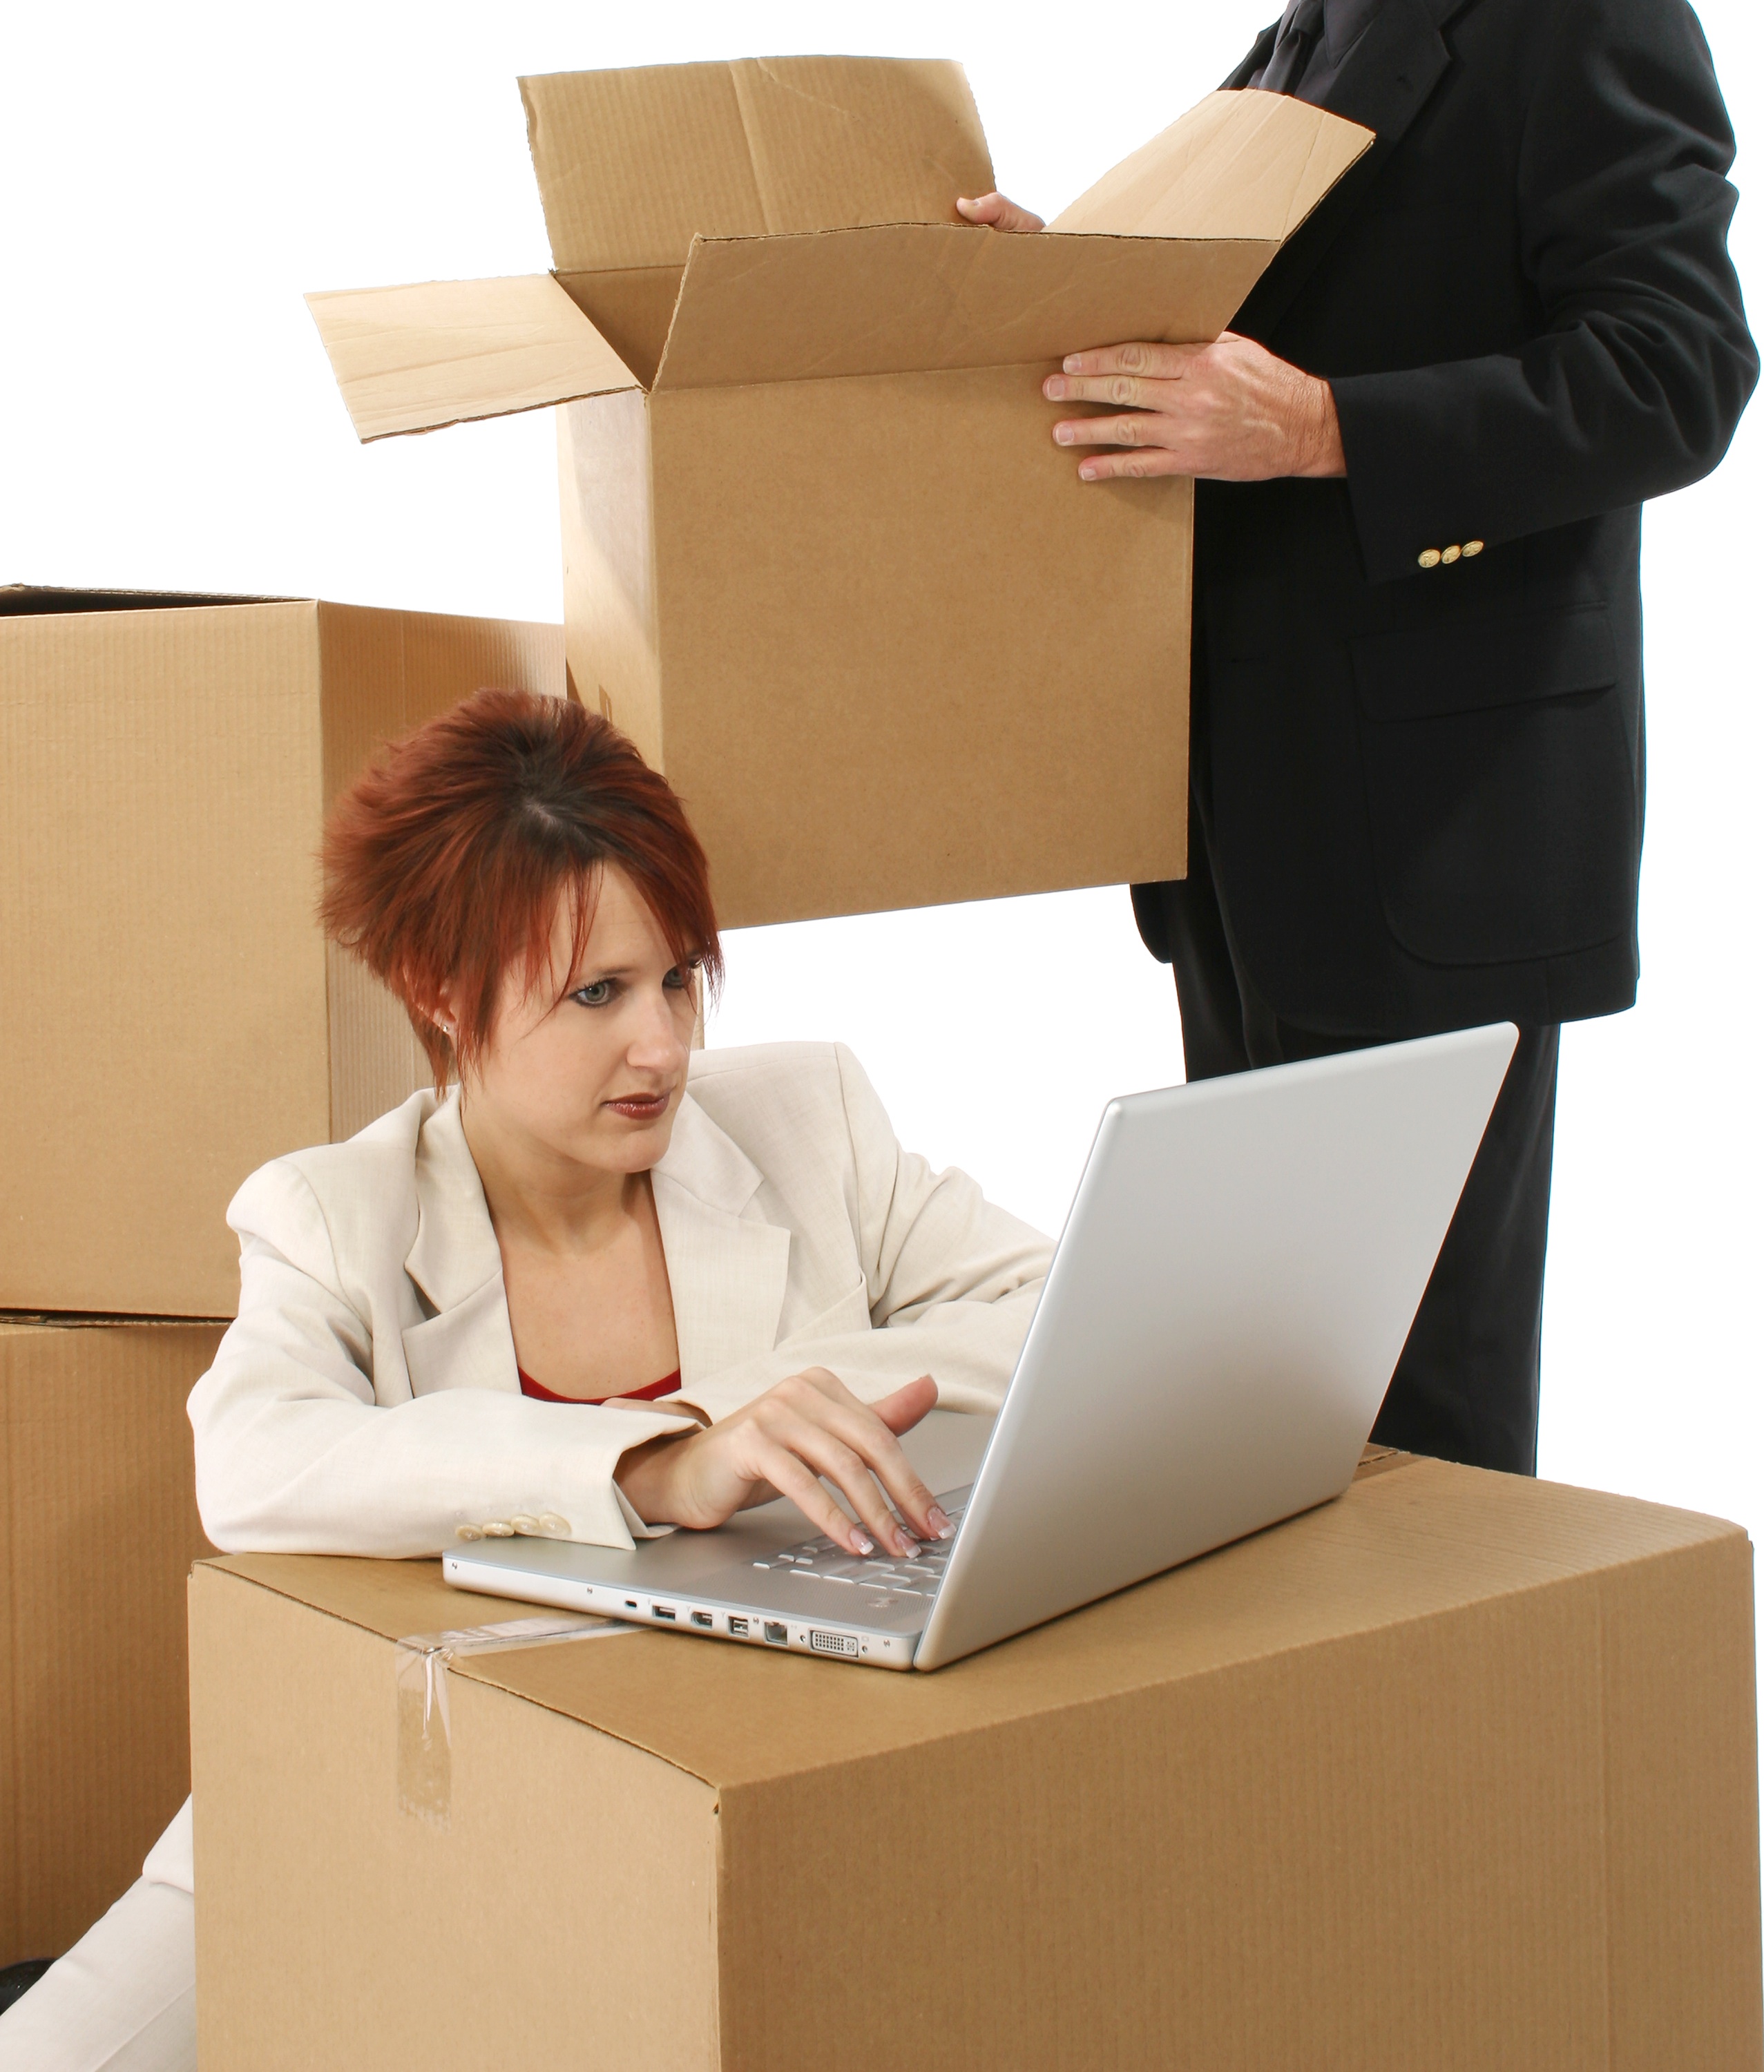 Business Relocation Survival Guide